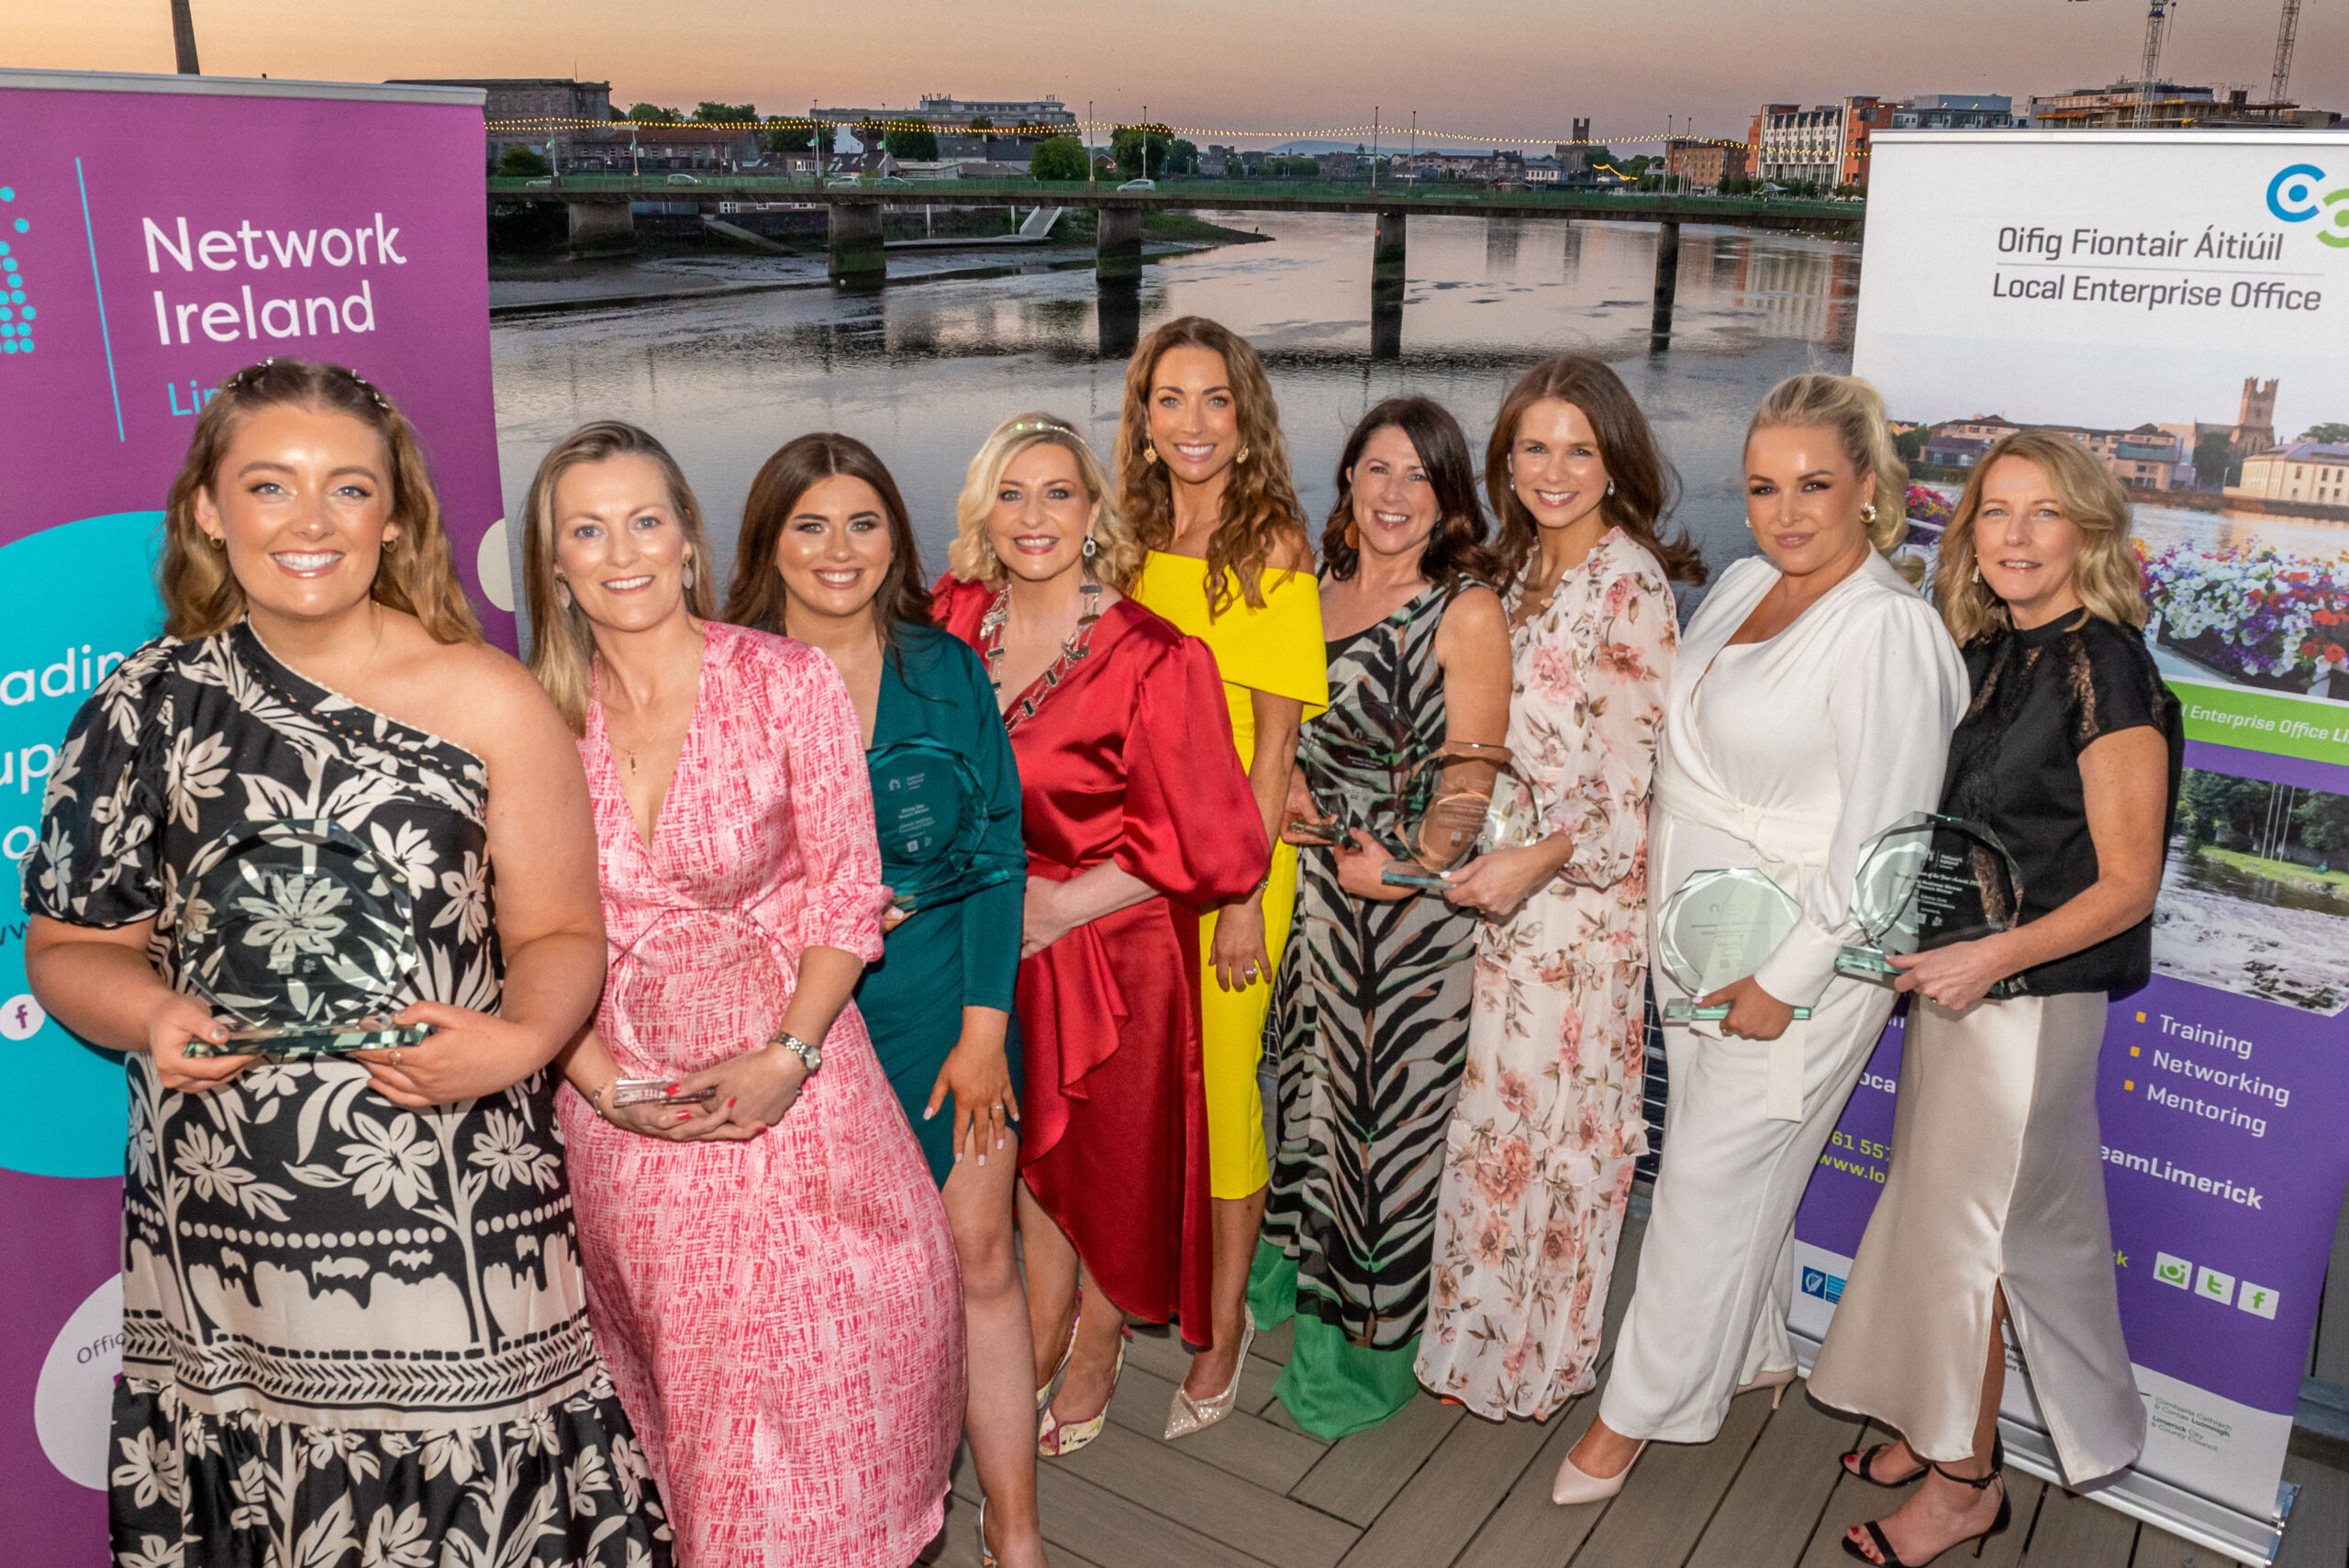 The Network Ireland Limerick 2023 Businesswoman of the Year Awards, sponsored by LEO Limerick and AIB was held at a special gala awards ceremony on Wednesday 31 May at The Clayton Limerick. Pictured are Winner of the Creative Professional, Nell Stritch, Pressed Flowers by Nell, Winner of the Shining Star Employee, Susan Walsh, Metis Ireland, Winner of Rising Star Employee, Danielle Markham, Eisner Amper Ireland, Karen Ronan, 2023 President of Network Ireland Limerick, Fiona Doyle, Vice President of Network Ireland Limerick, Winner of Networker of the Year, Valerie Murphy, Valerie’s Breast Care, Winner of Established Business, Denise Brazil, The Bedford Townhouse, Winner of Emerging New Business, Sinead O’Brien, Vacious Shapewear and Winner of the Solo Businesswoman, Edwina Gore, Gore Communications. Picture: Olena Oleksienko/ilovelimerick